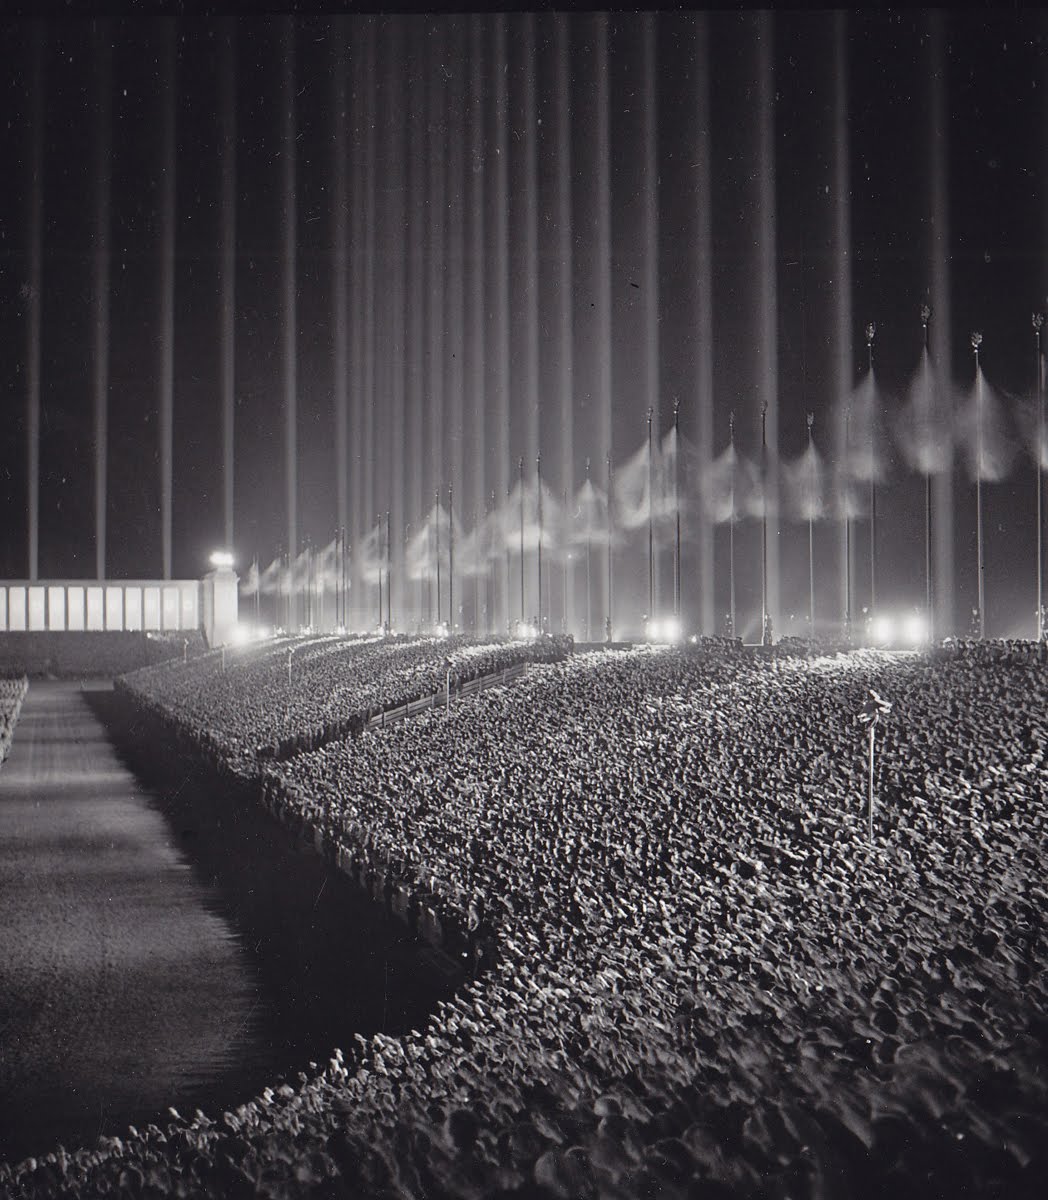 Nazi+rally+in+the+Cathedral+of+Light+c.+1937.jpg